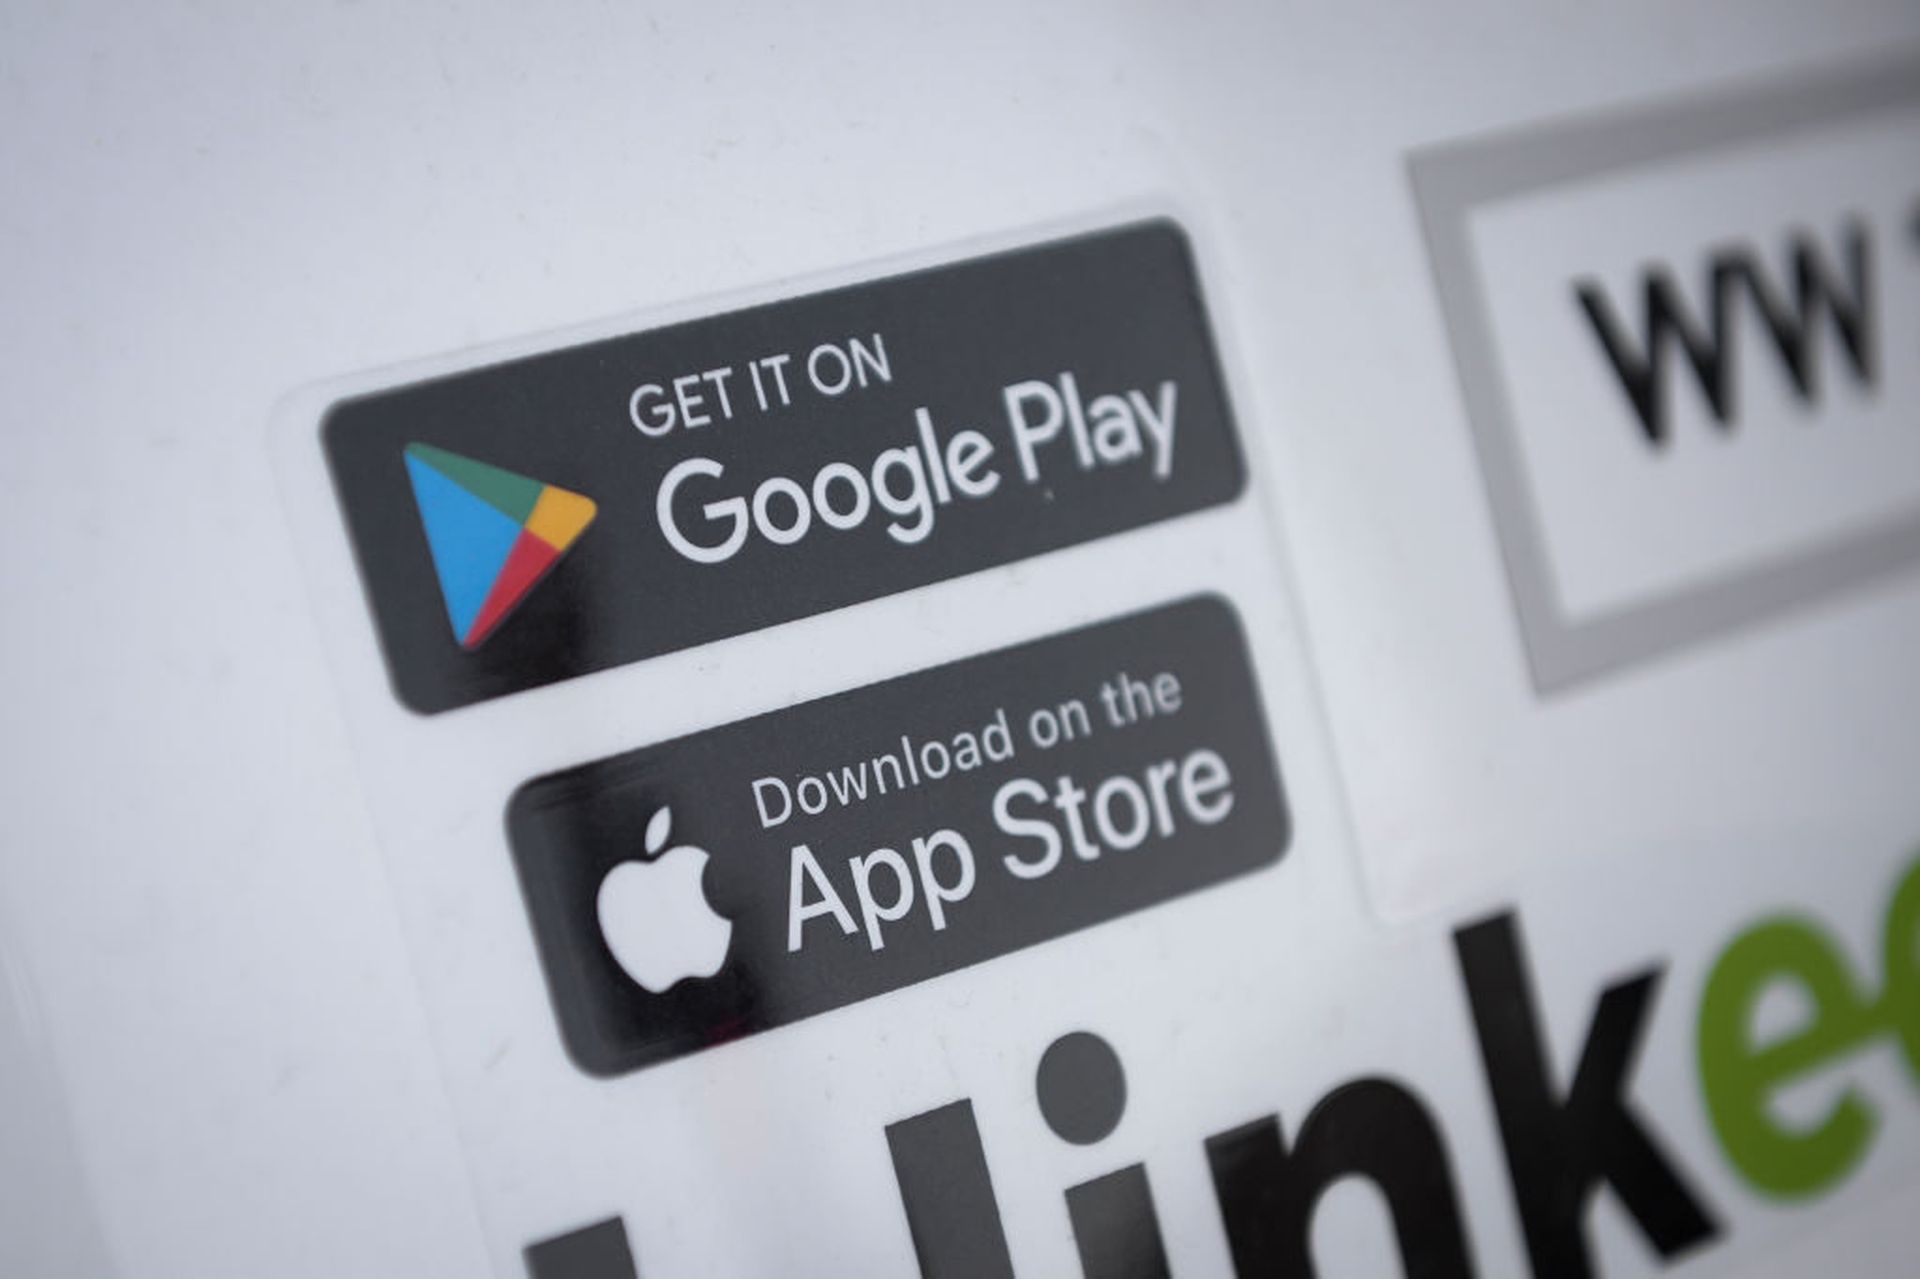 Malicious Google Play apps are sold for up to $20,000 on underground online marketplaces, with cryptocurrency trackers, financial apps, QR-code scanners, and dating apps being the most targeted application categories to hide malware, according to new research from antivirus firm Kaspersky.  (Photo by Jaap Arriens/NurPhoto via Getty Images)